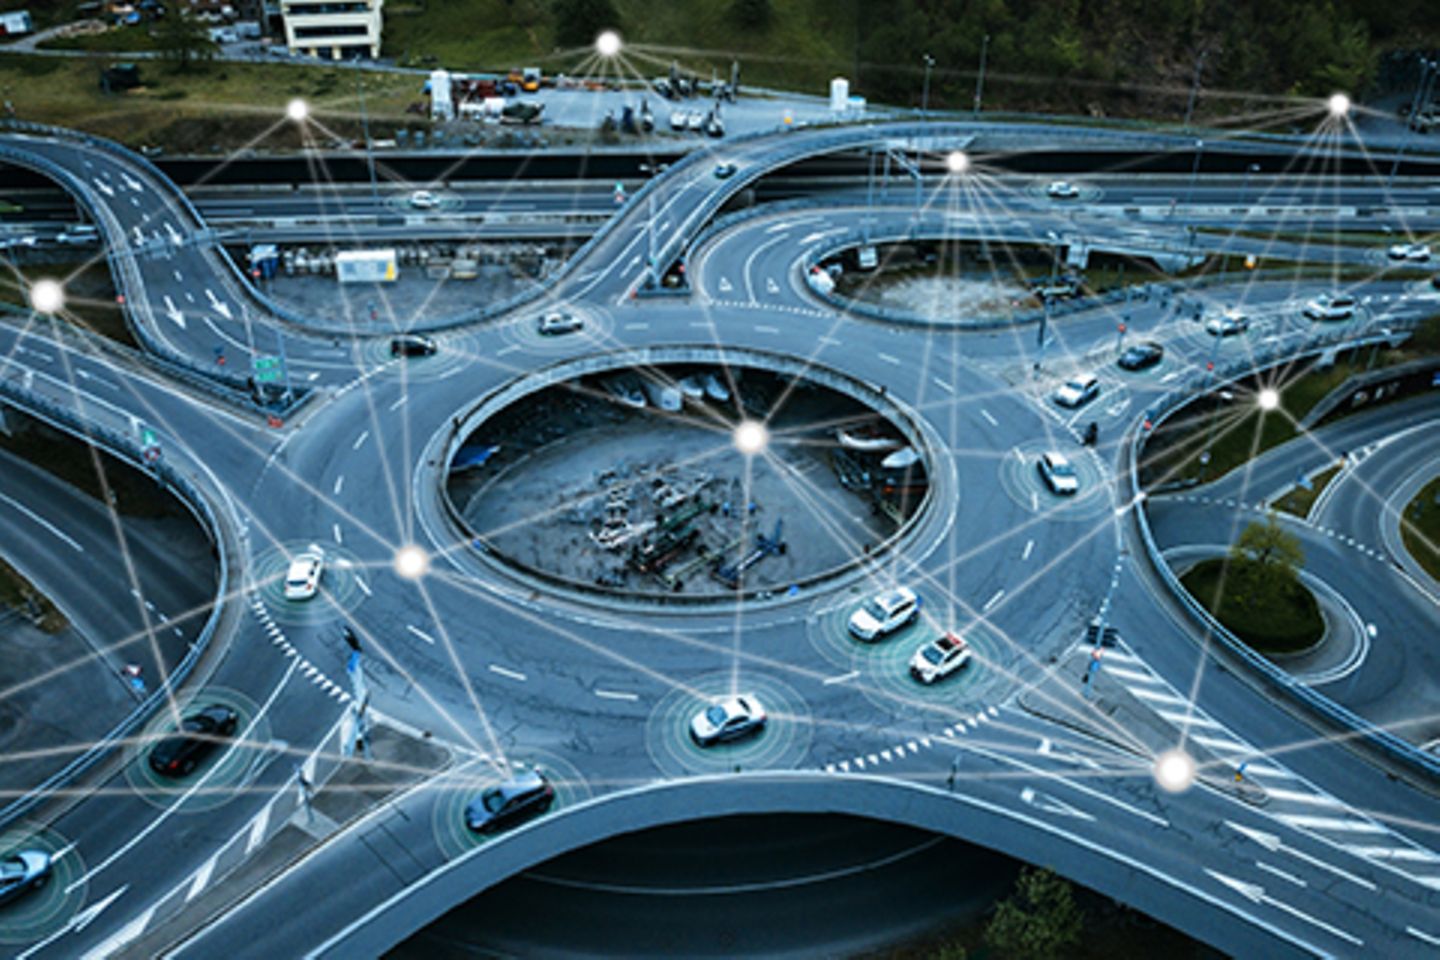 Roundabout from above, in which many cars drive that are connected via digital networks